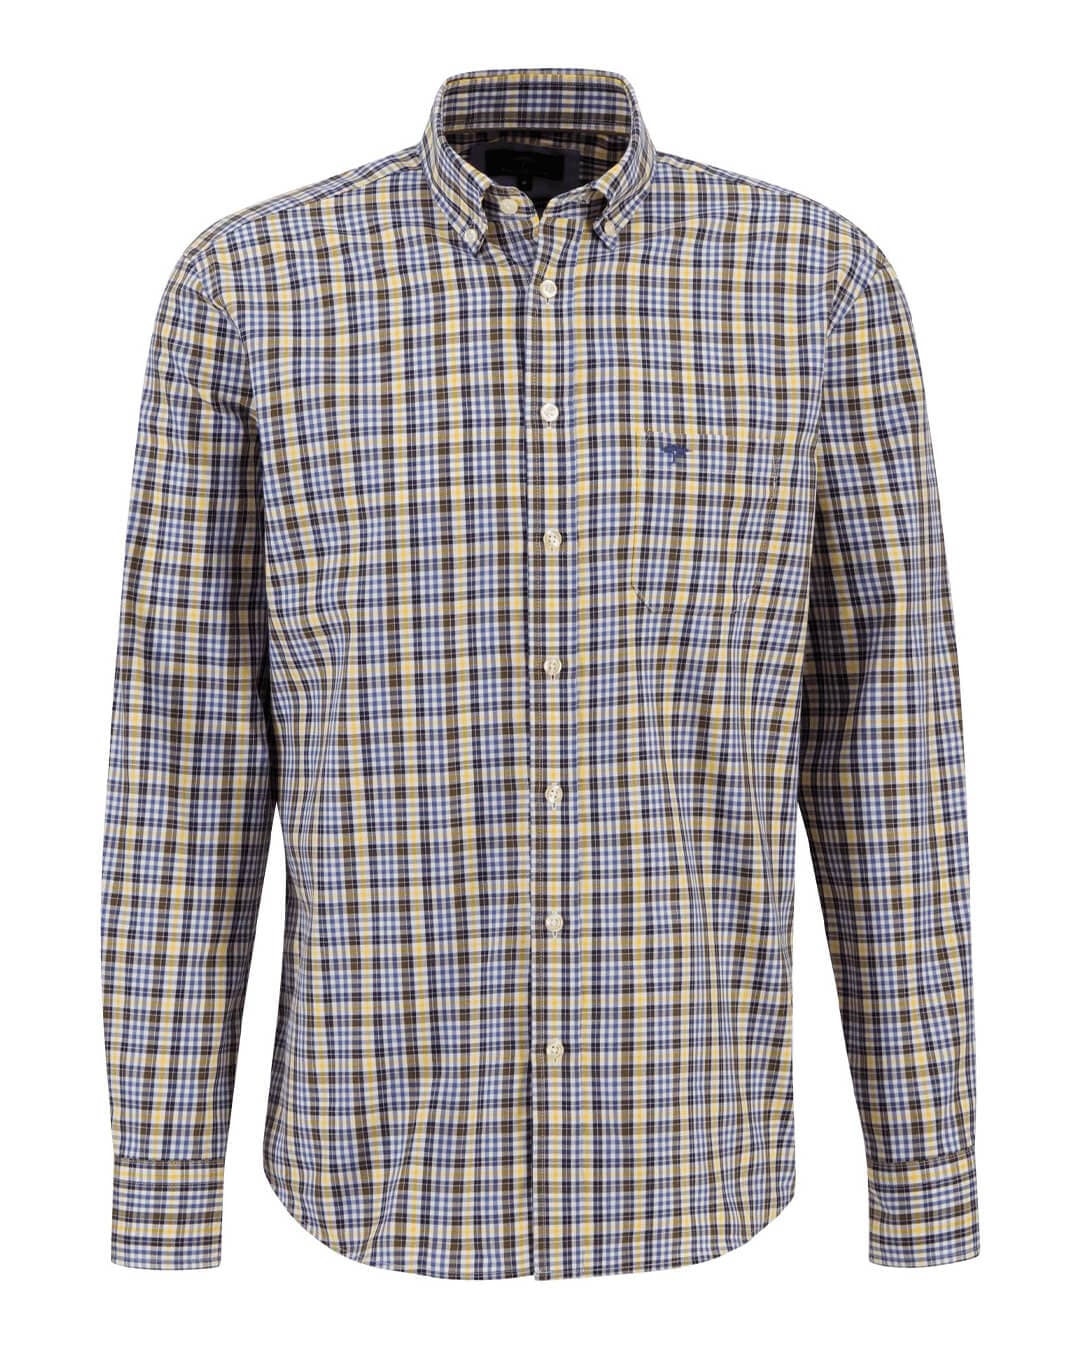 Fynch-Hatton Shirts Fynch-Hatton Yellow Checked Long Sleeved Shirt